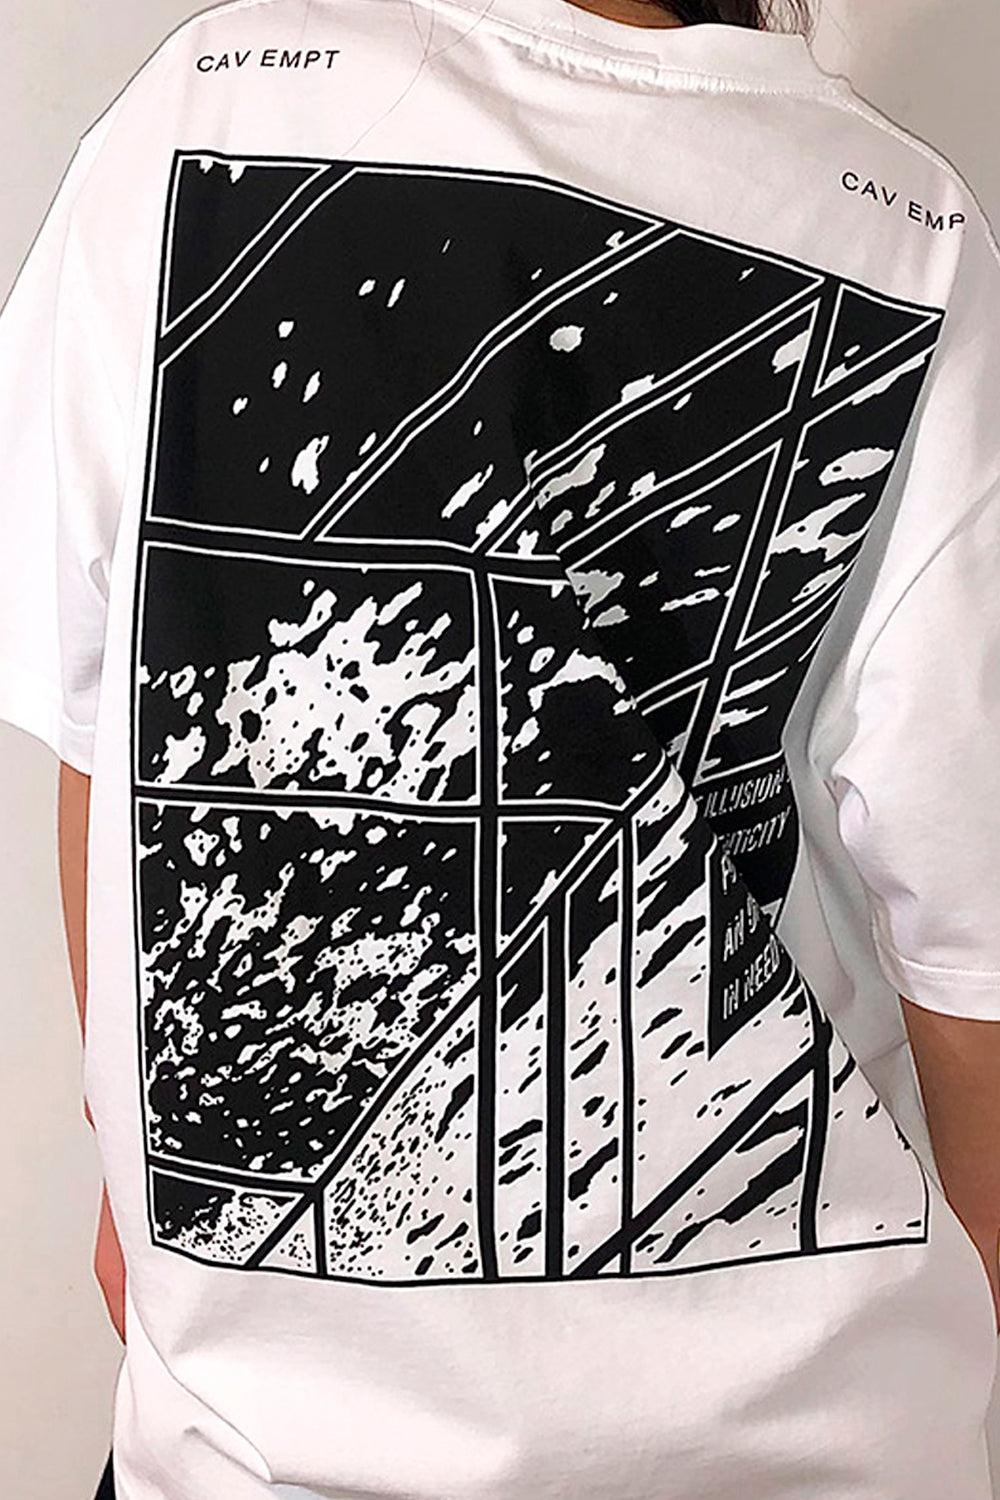 Cav Empt Abstract Room T-Shirt - Aesthetic Clothes Shop